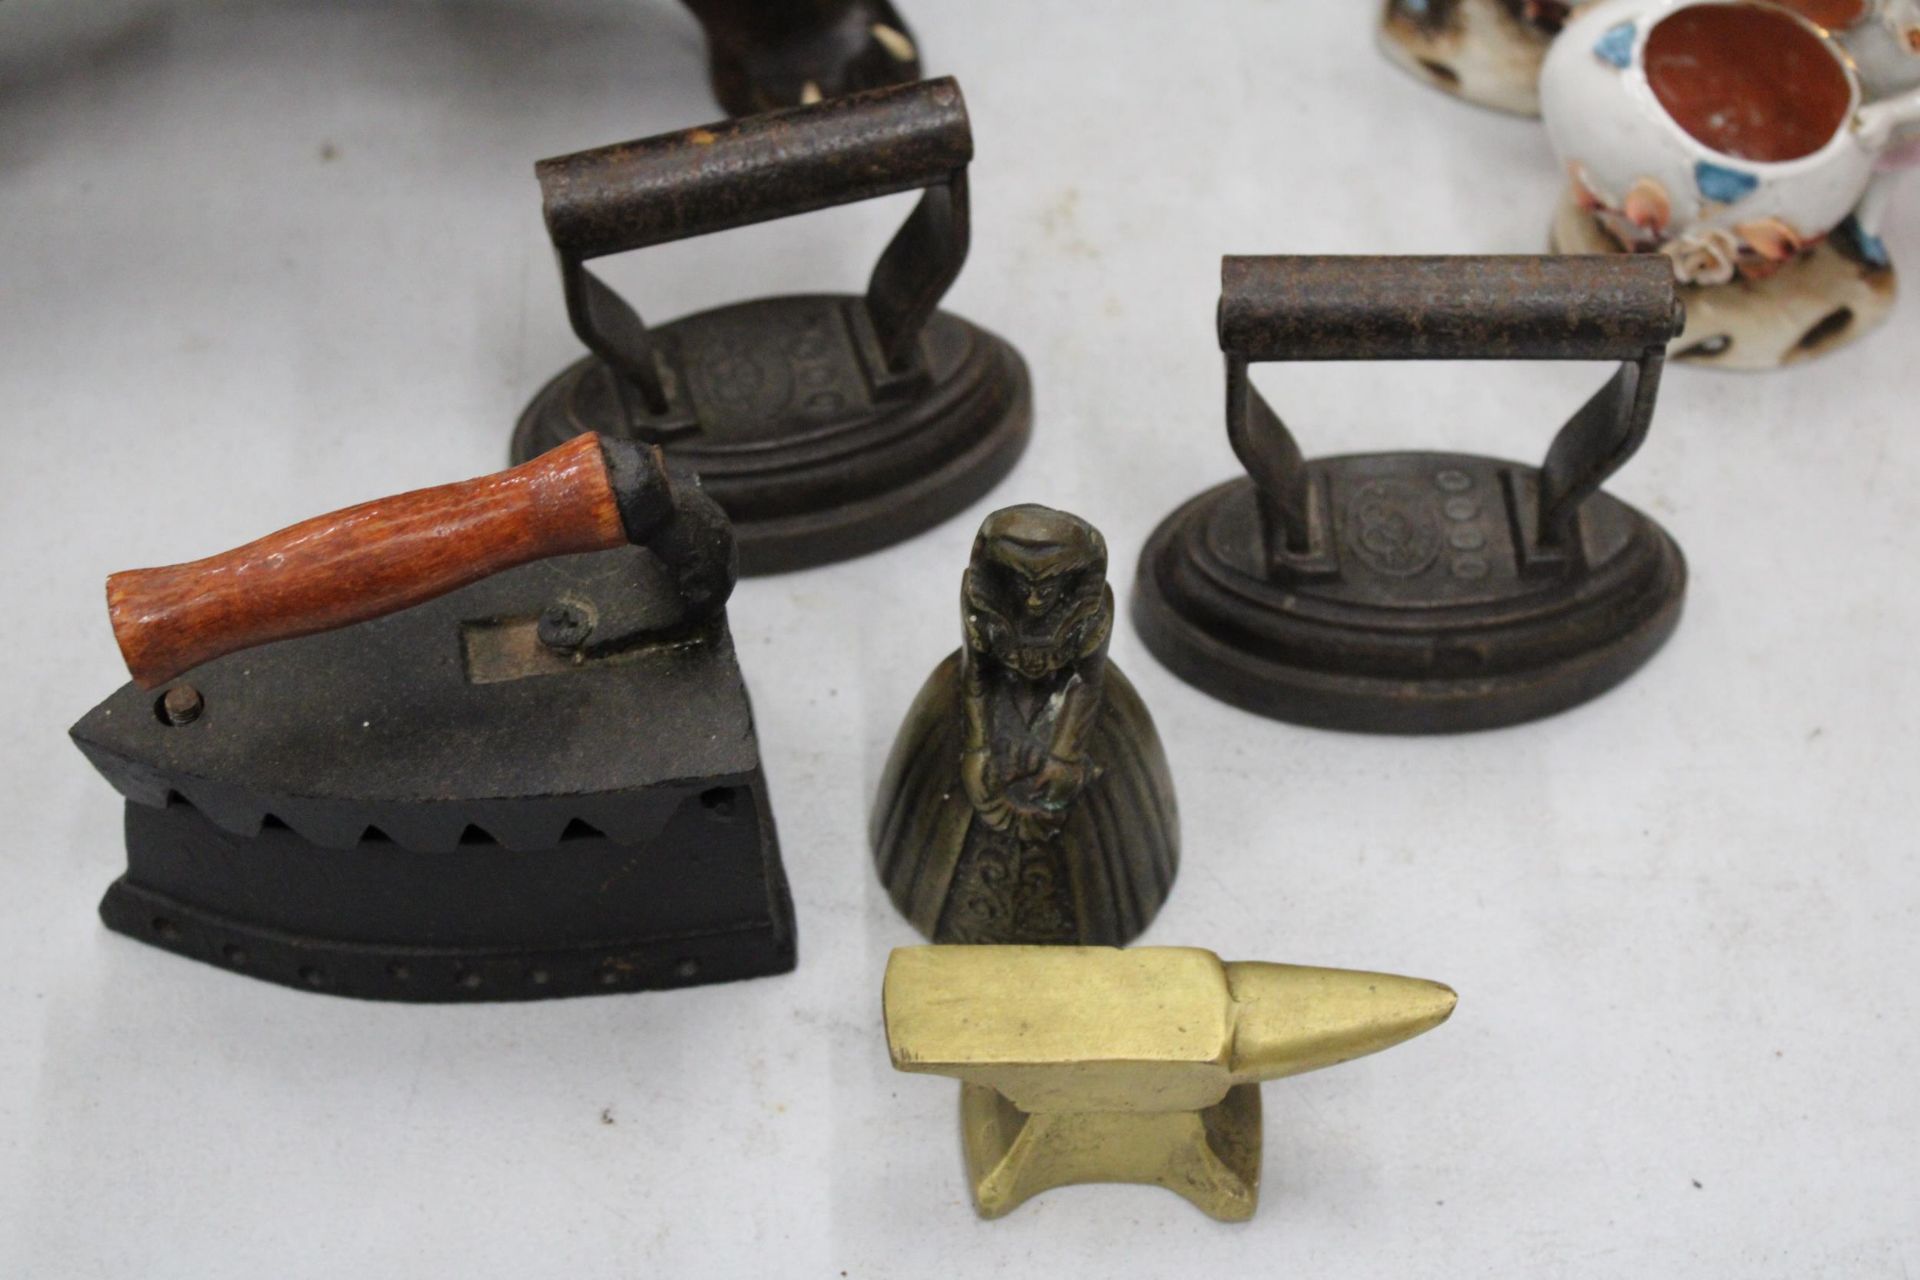 A COLLECTION OF MINIATURE ITEMS TO INCLUDE THREE IRONS, A BRASS ANVIL AND A 'LADY' BELL